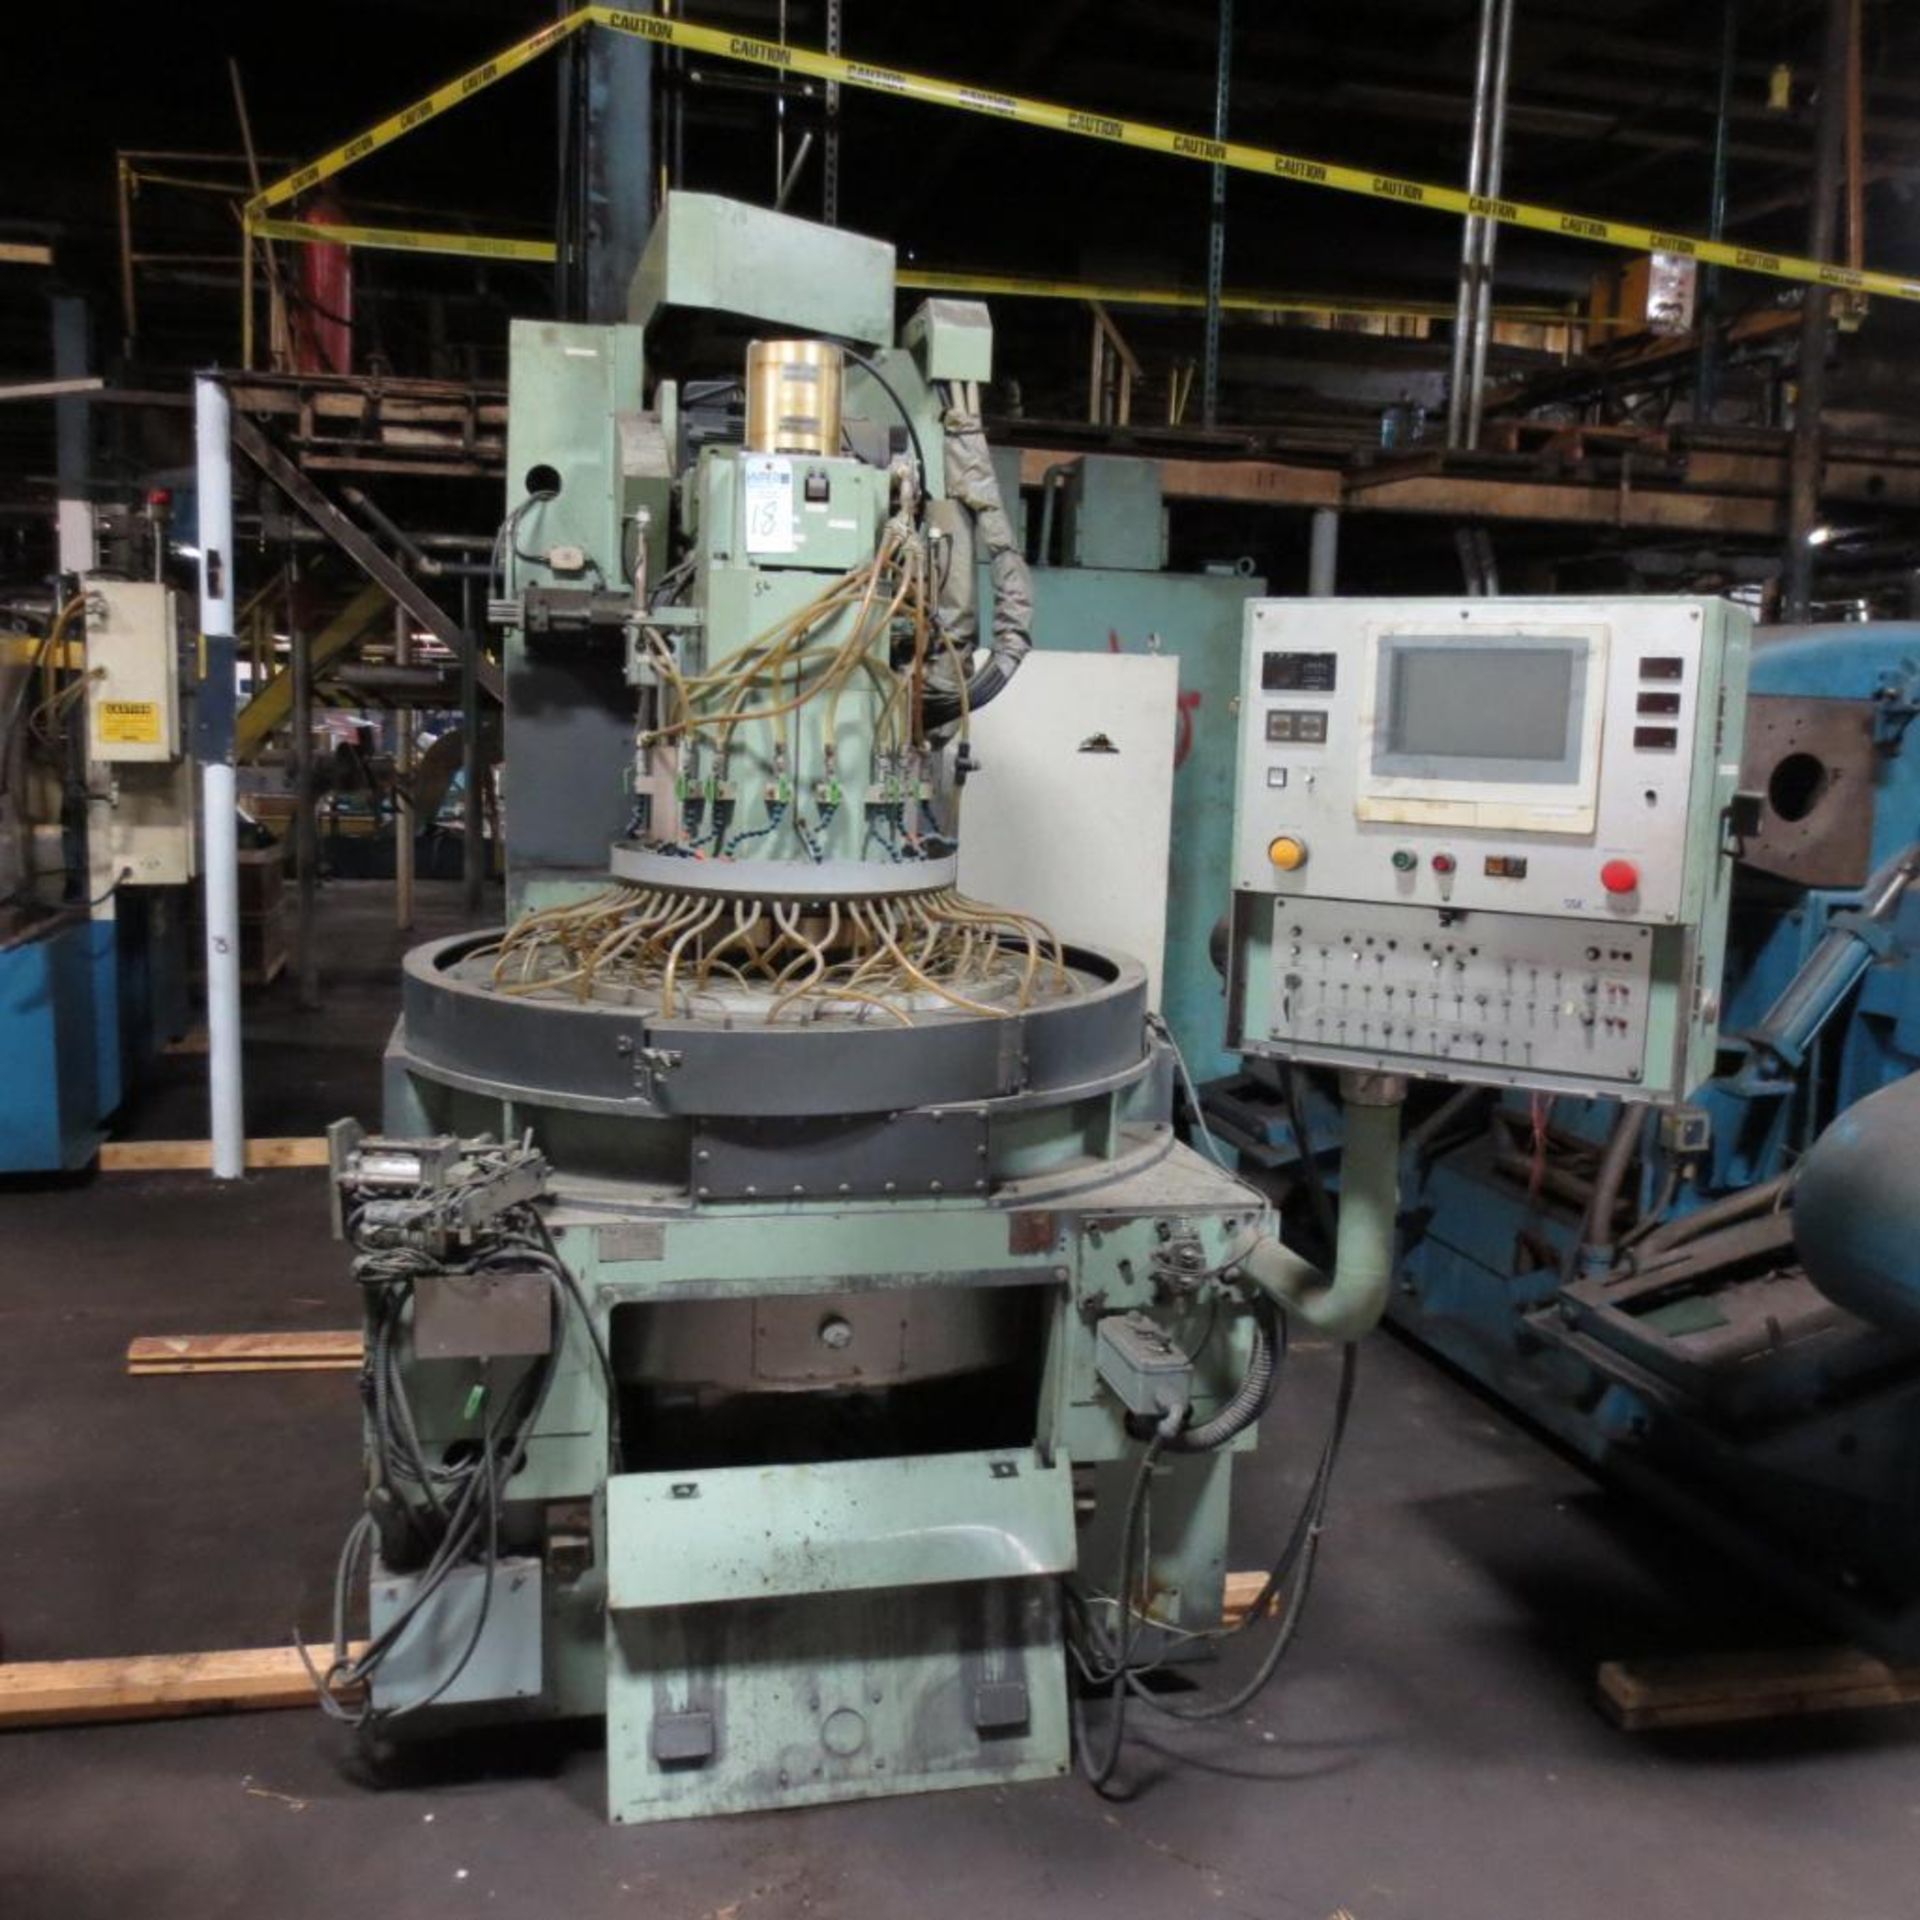 SSC System Seiko Vertical Lapping Machine S/N: 3745 (1996) CNC Control. Loading Fee is $850.00